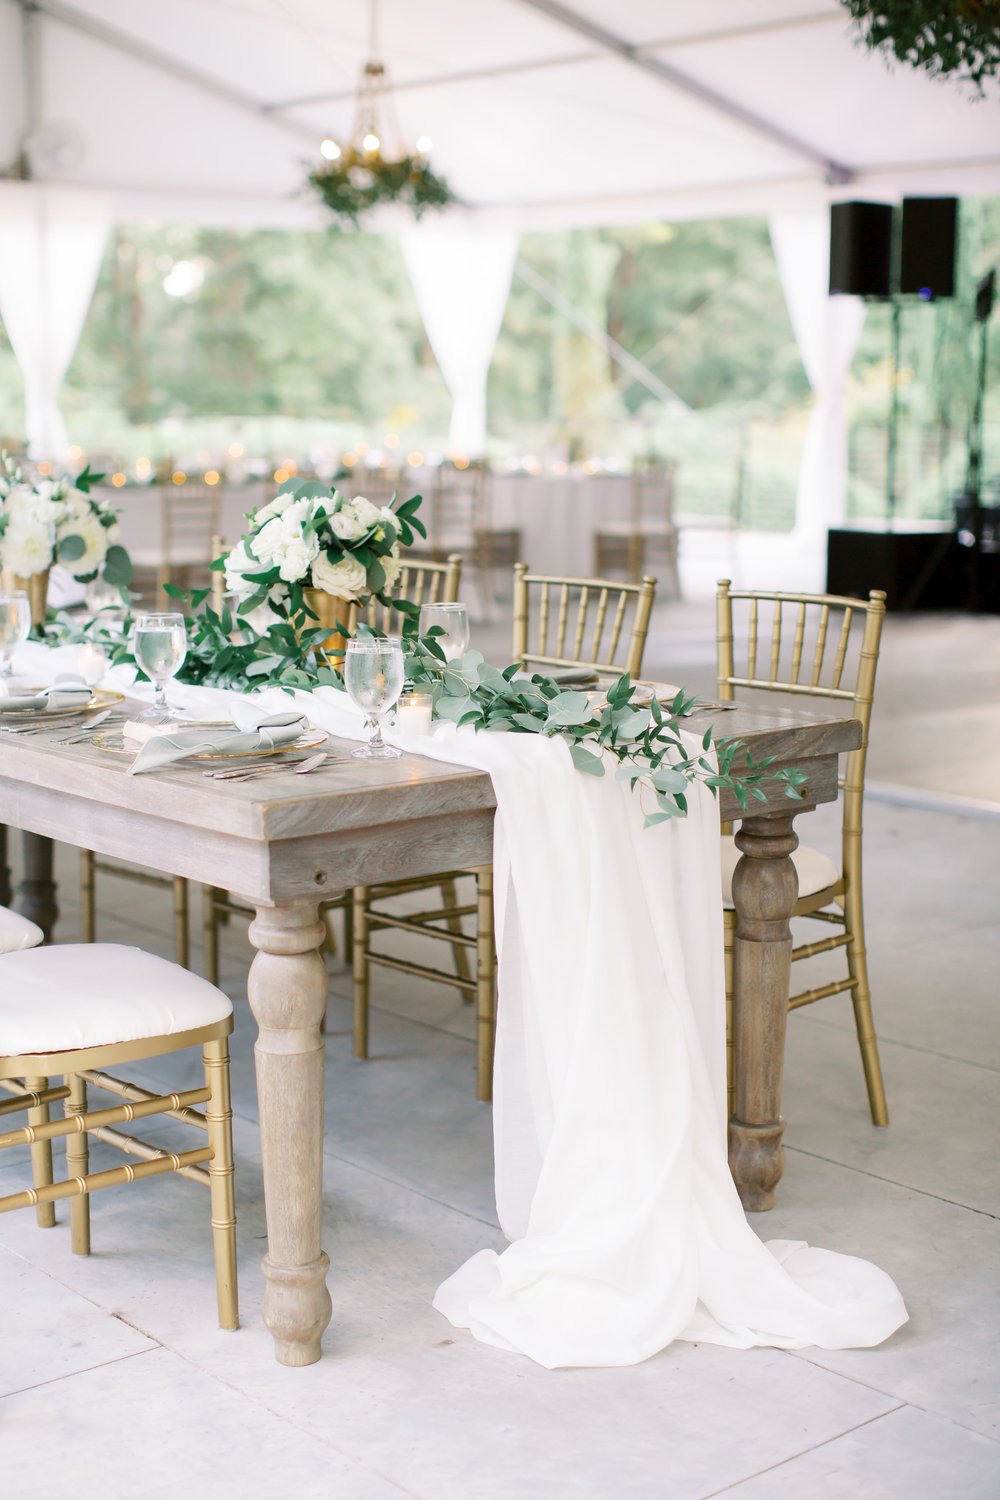 Head table inspiration with greenery